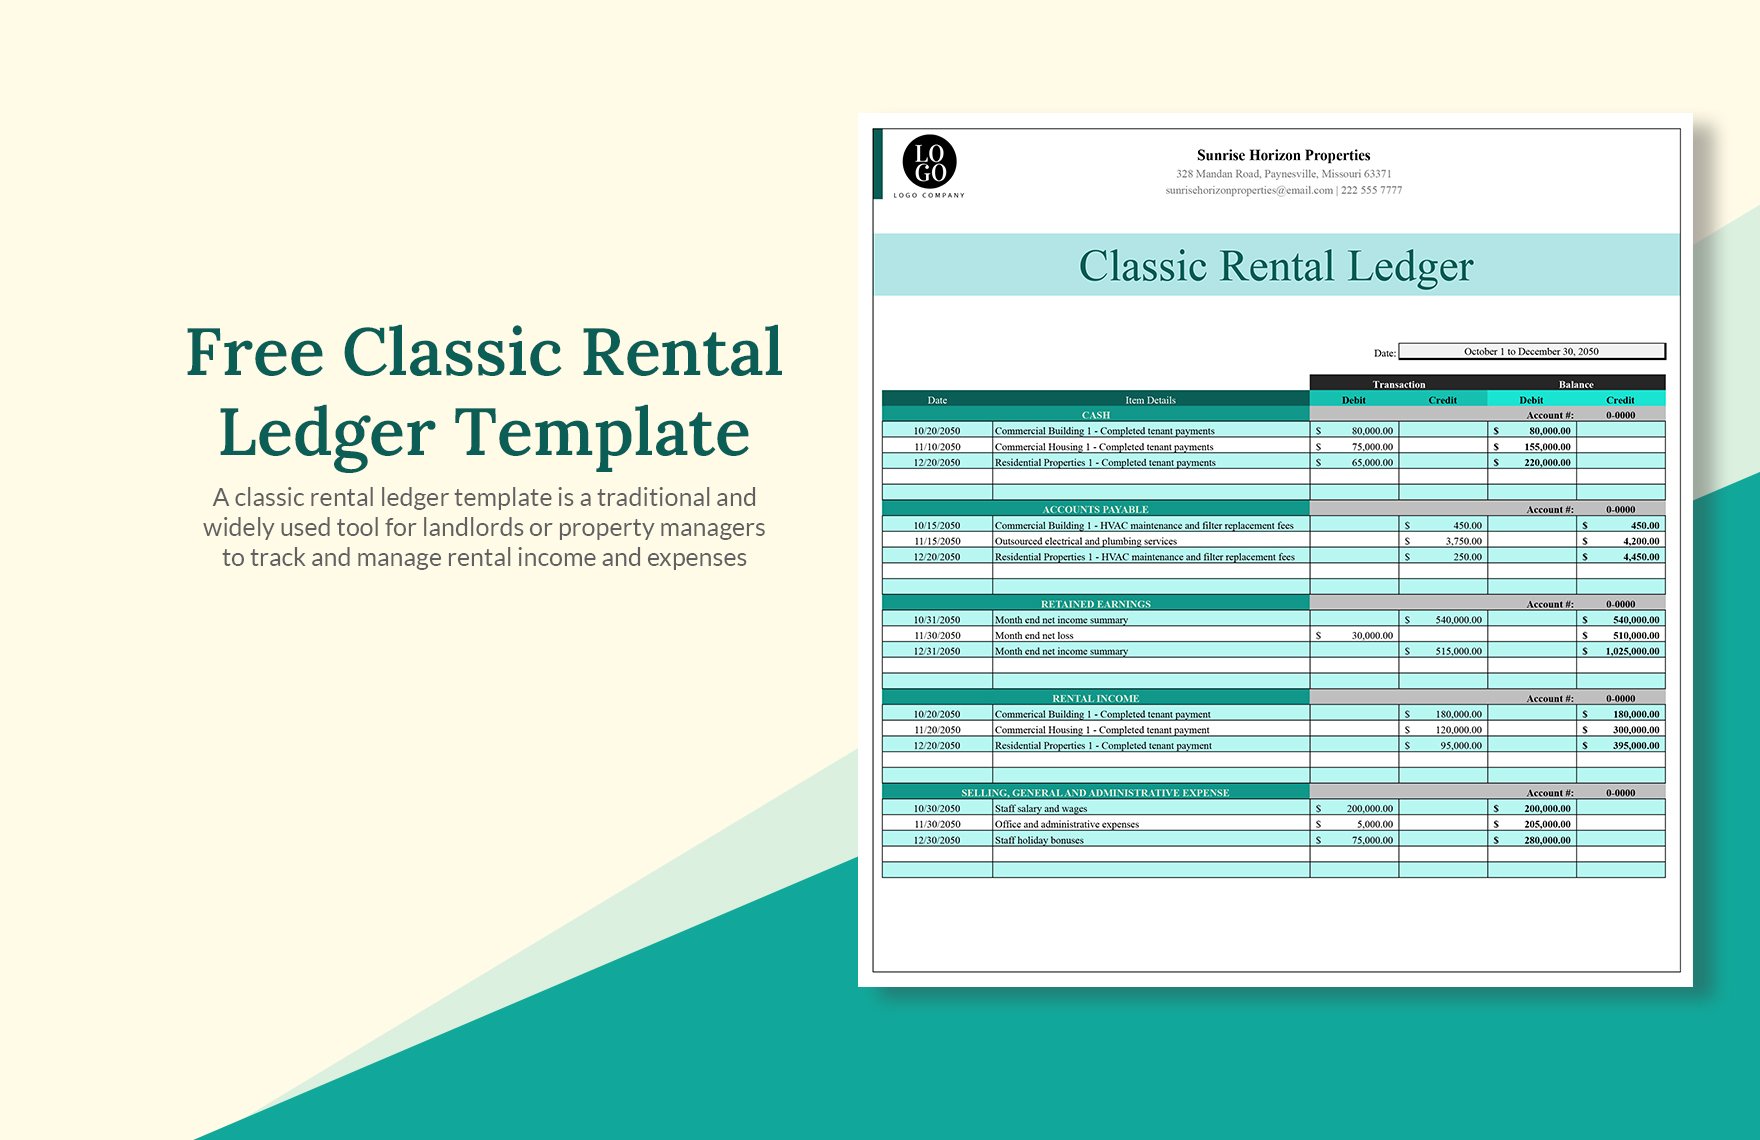 Classic Rental Ledger Template in Excel, Google Sheets